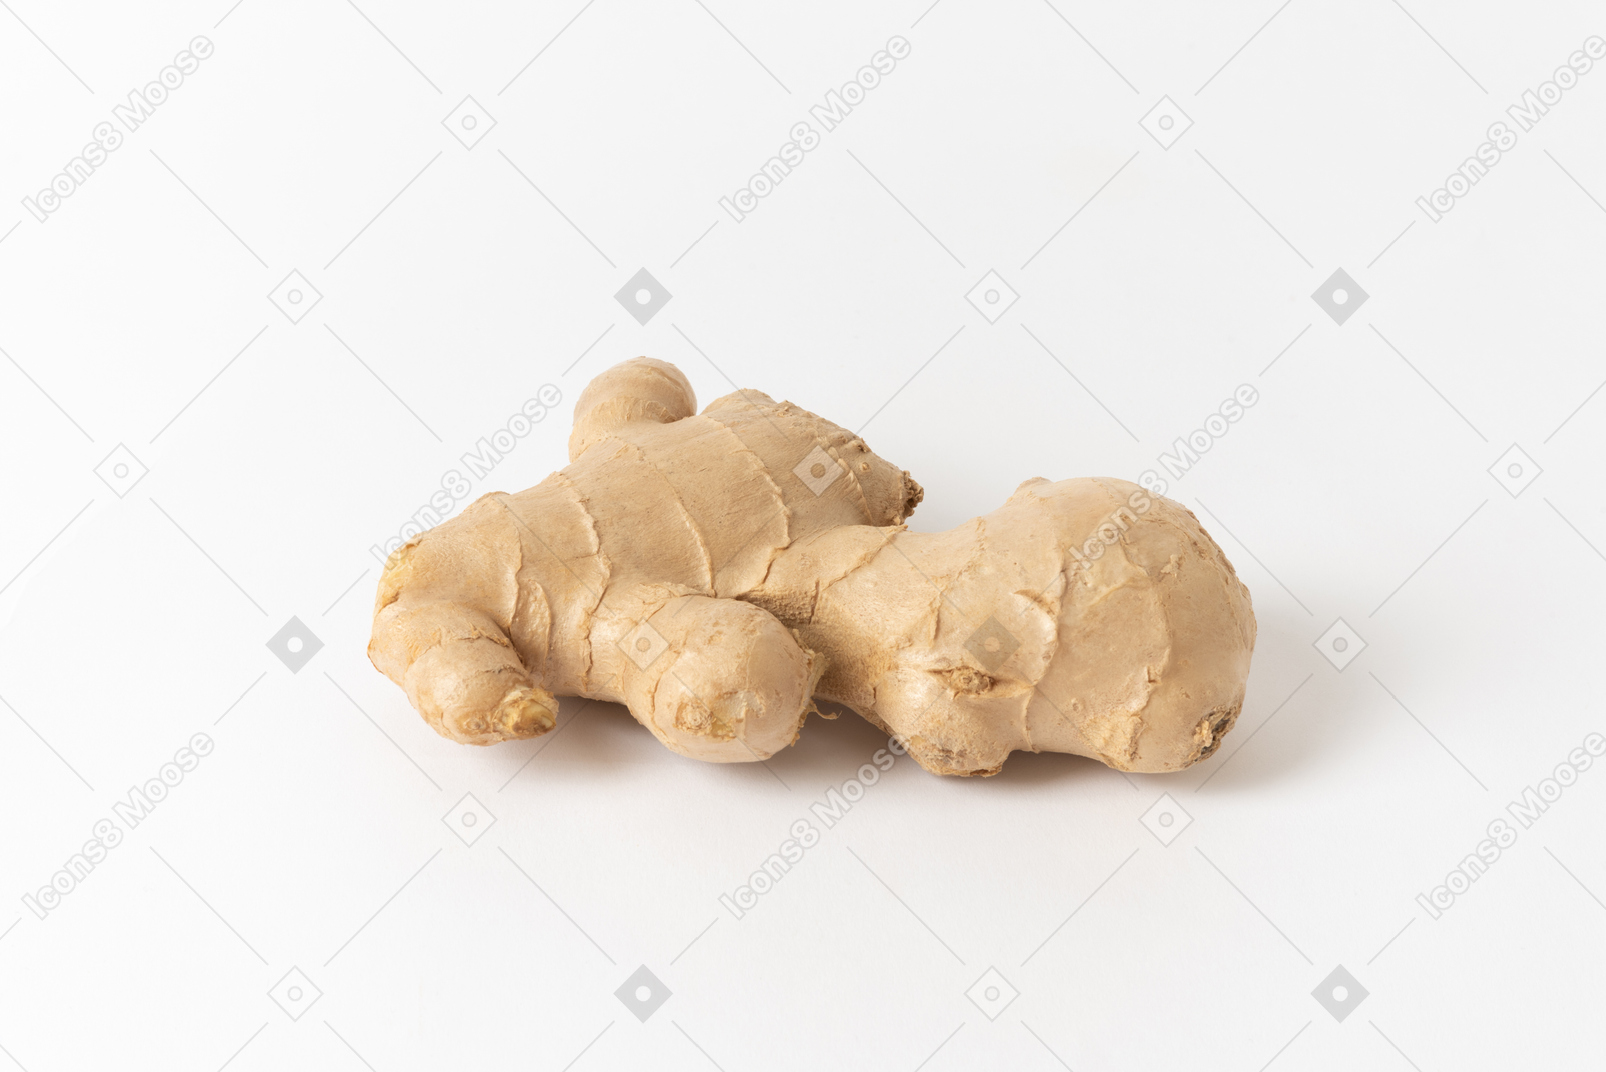 Do you know that ginger relieves muscle pain?